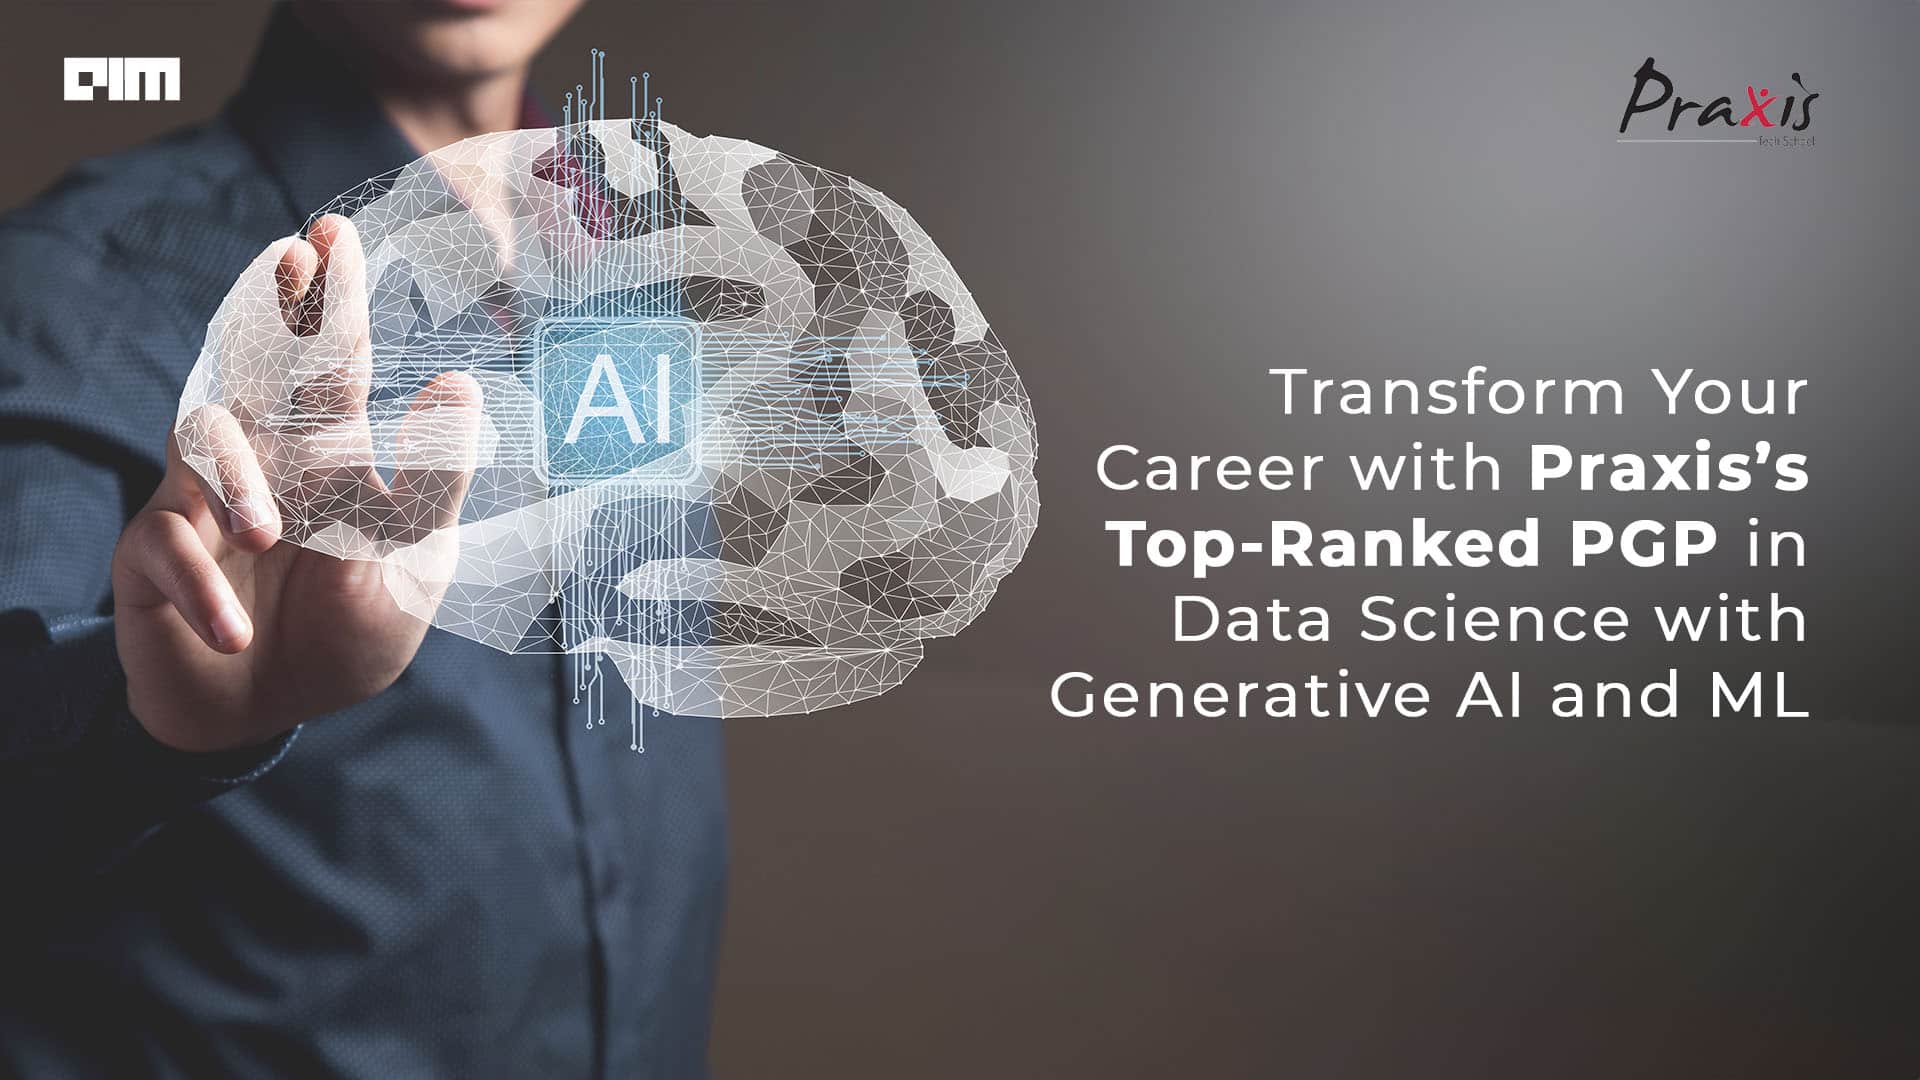 Transform Your Career with Praxiss Top-Ranked PGP in Data Science with Generative AI and ML [Video]